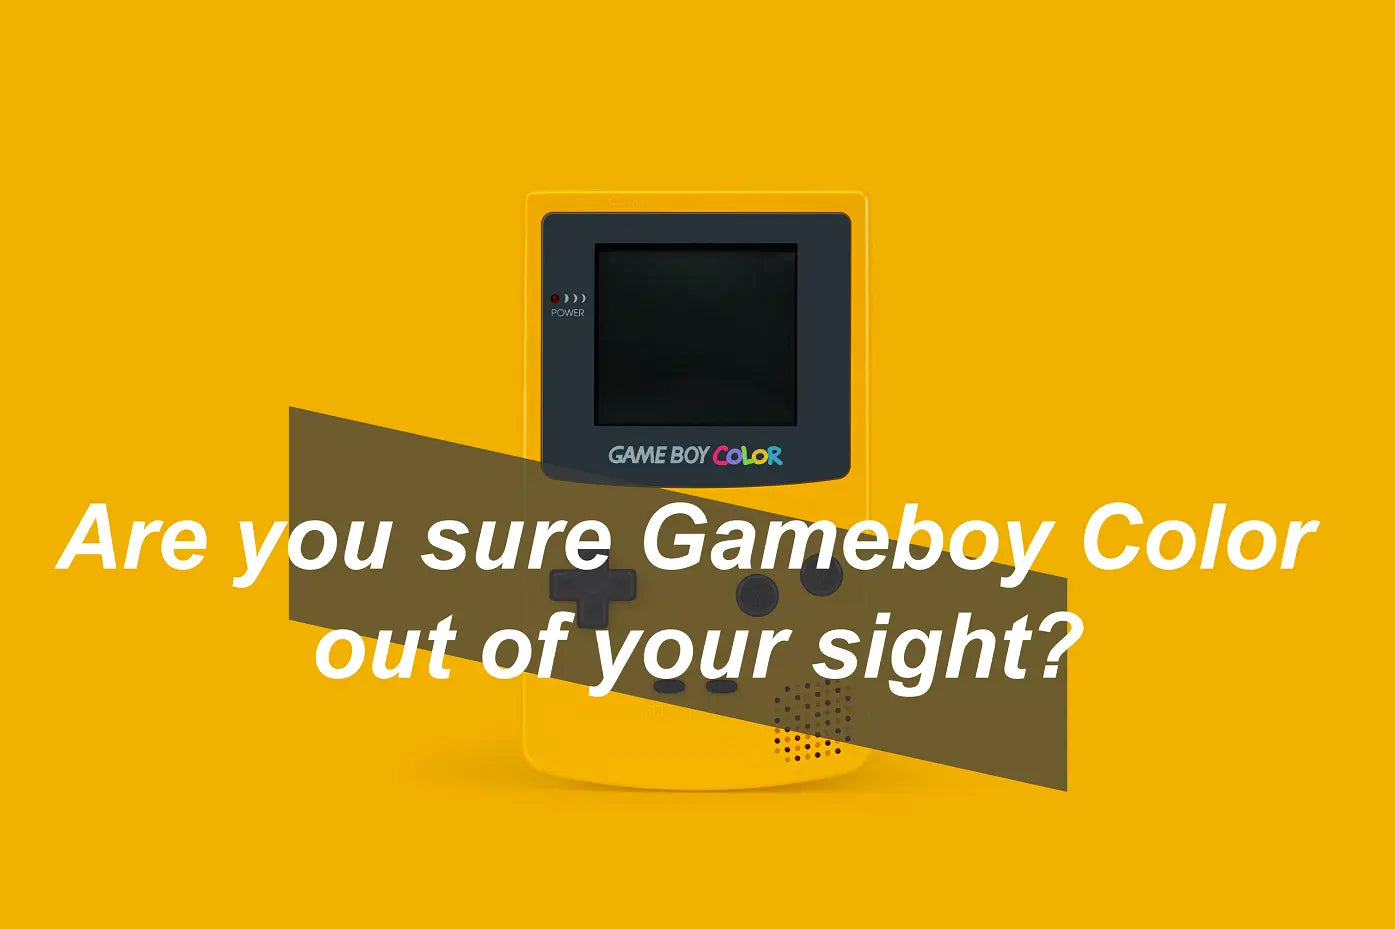 Are you make sure Gameboy Color out of your sight now?